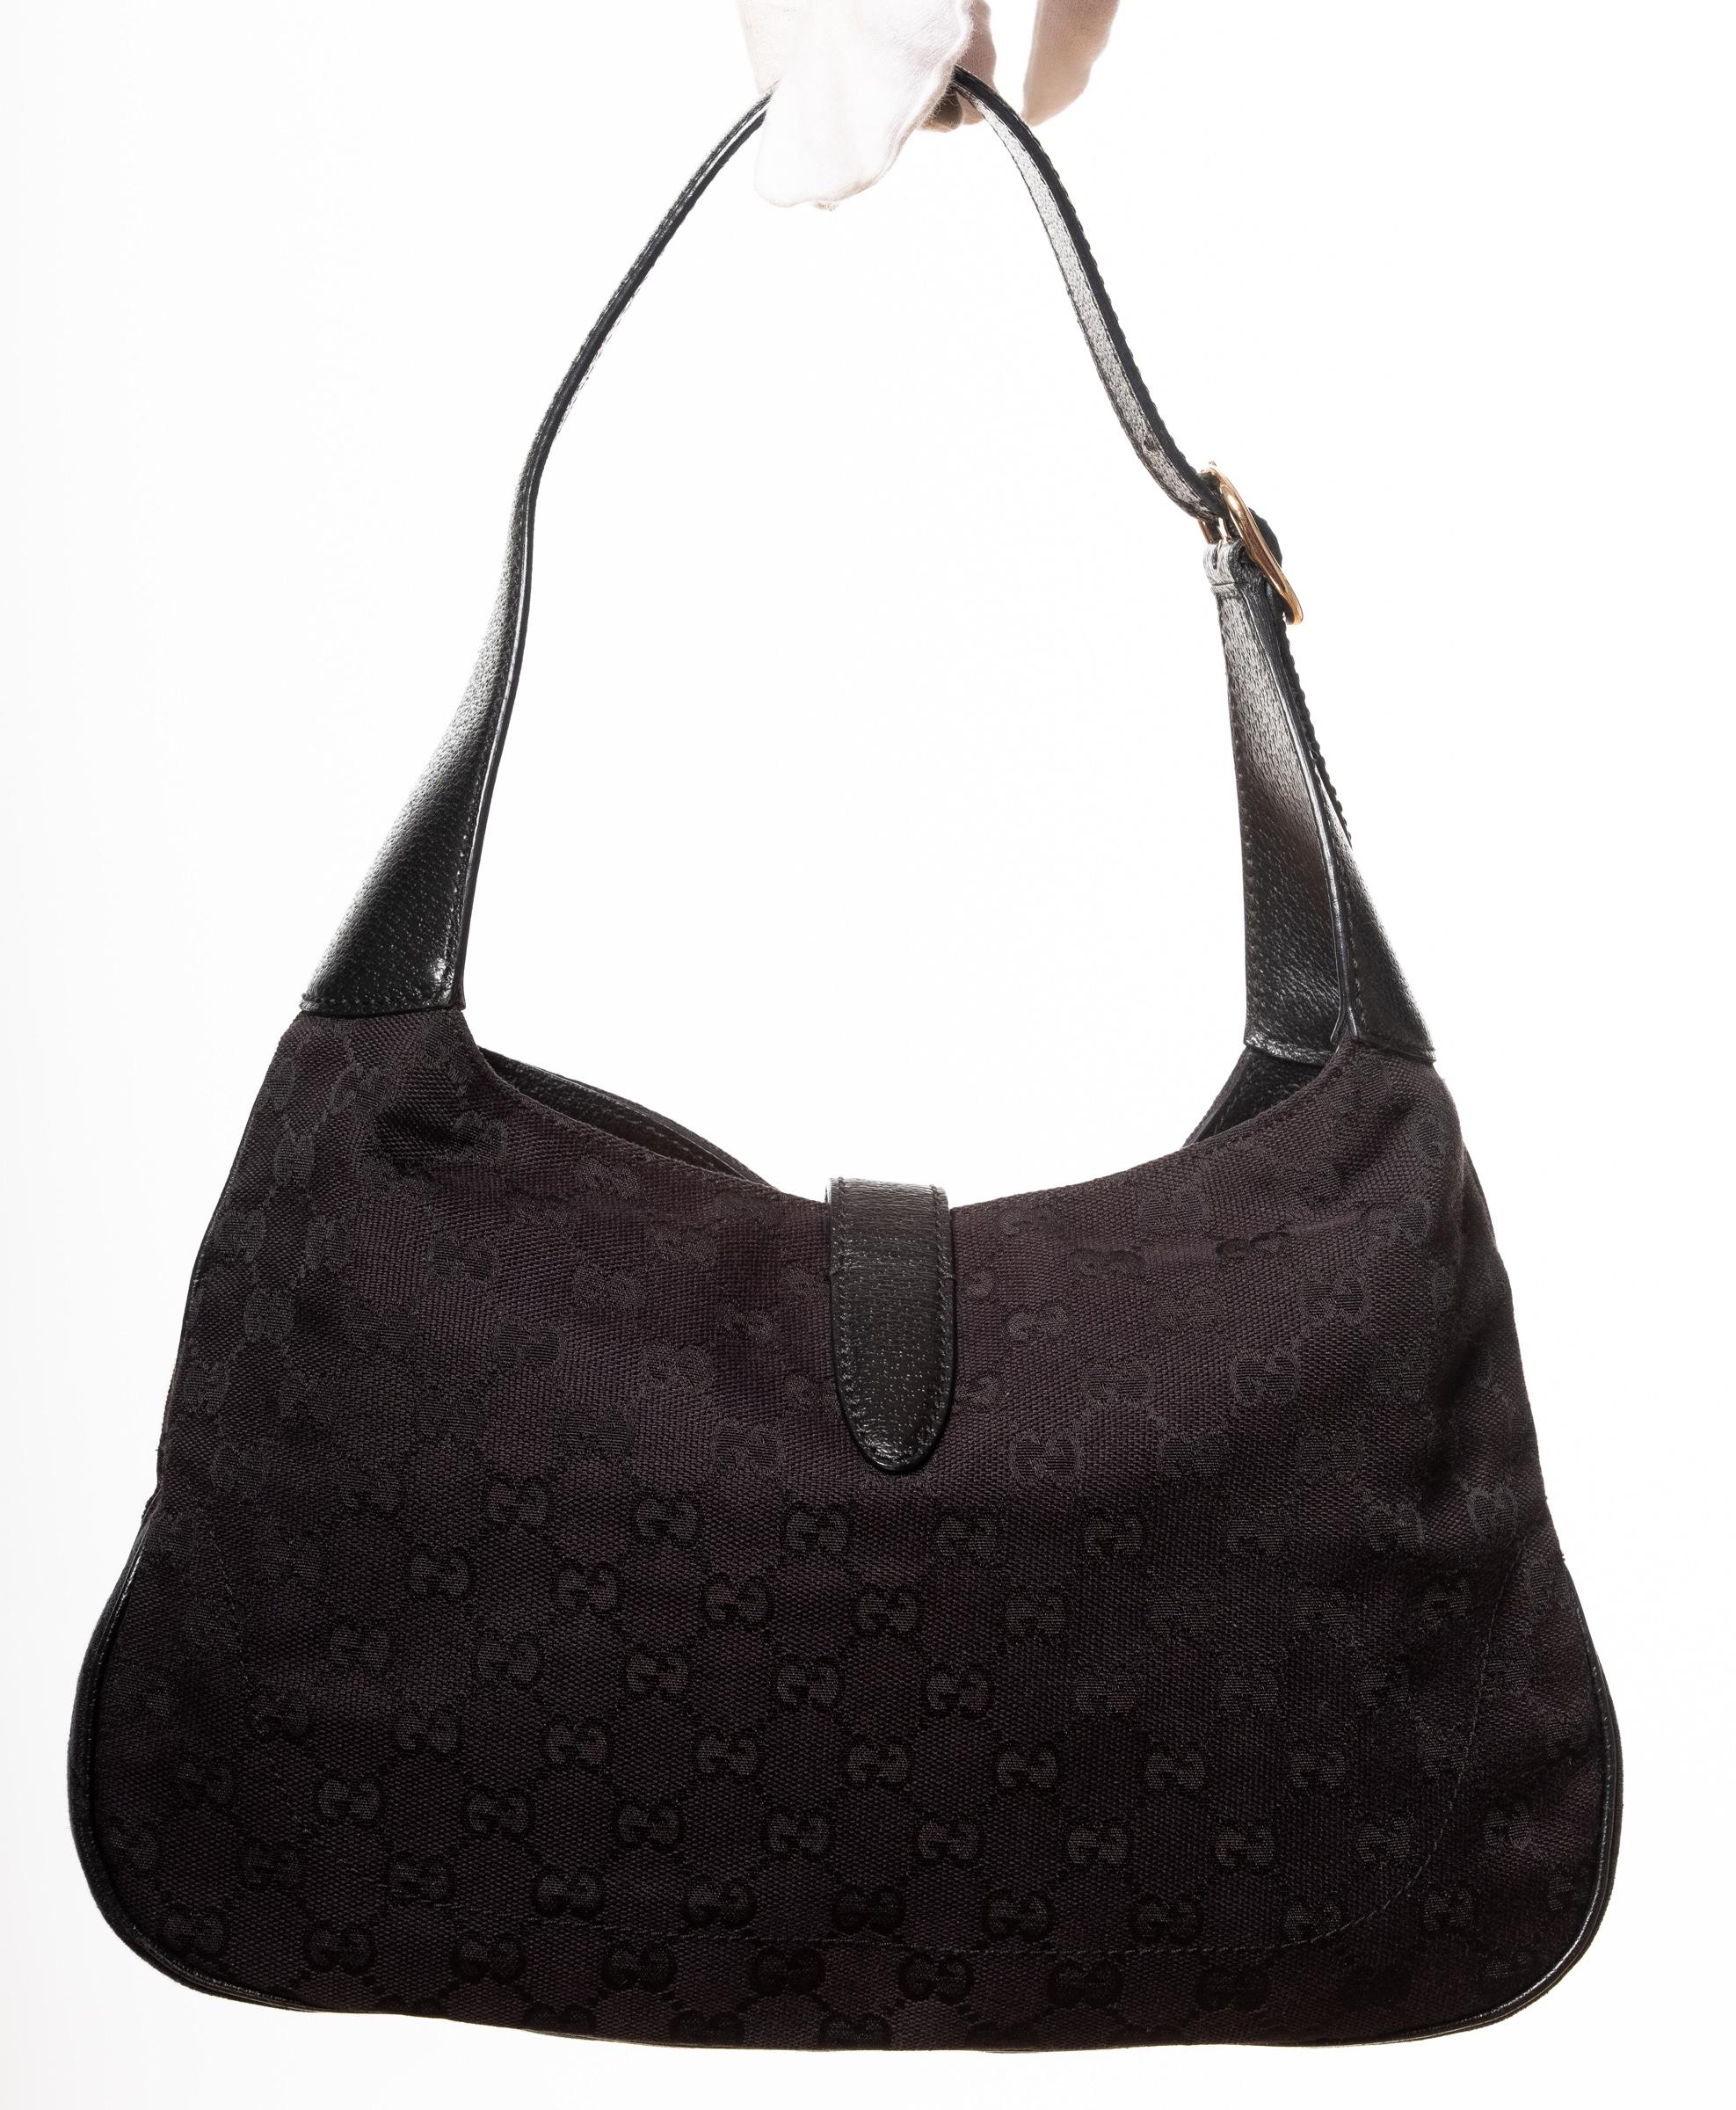 This hobo bag is made of black Gucci GG monogram canvas with leather finishes. The bag features a looping leather shoulder strap and a cross over strap with a rounded silver tone piston lock to secure the top. This opens to a black fabric interior